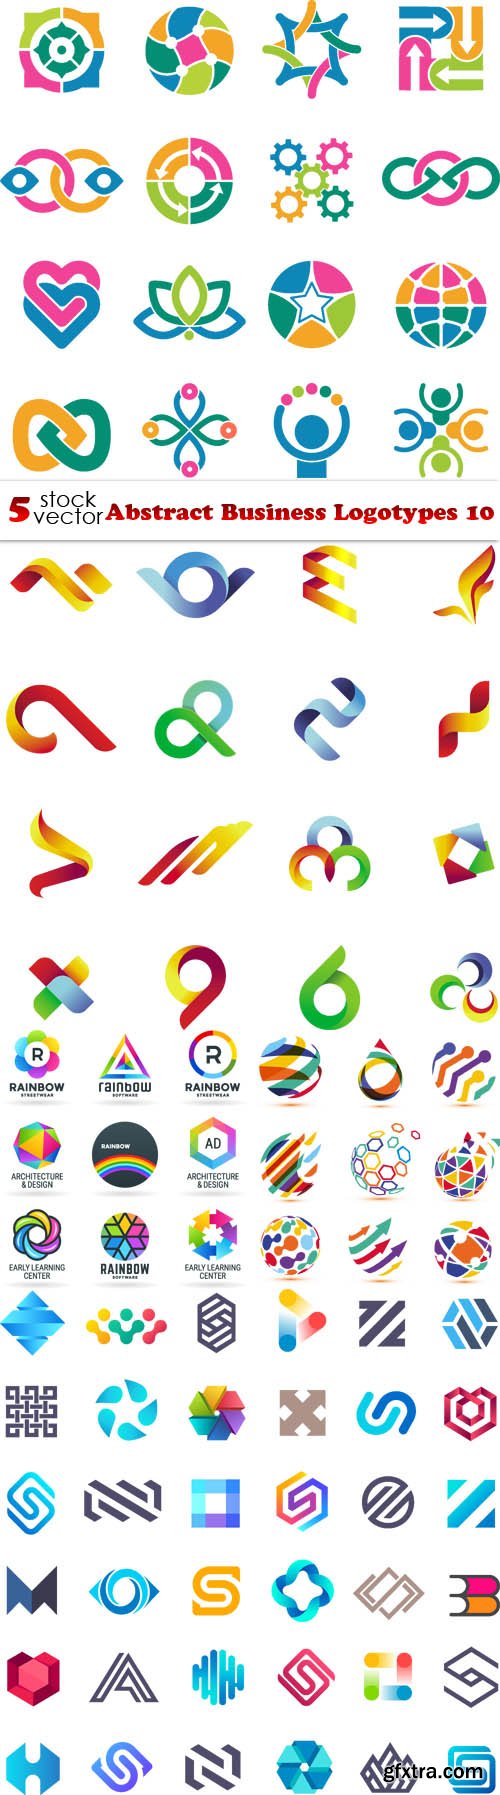 Vectors - Abstract Business Logotypes 100